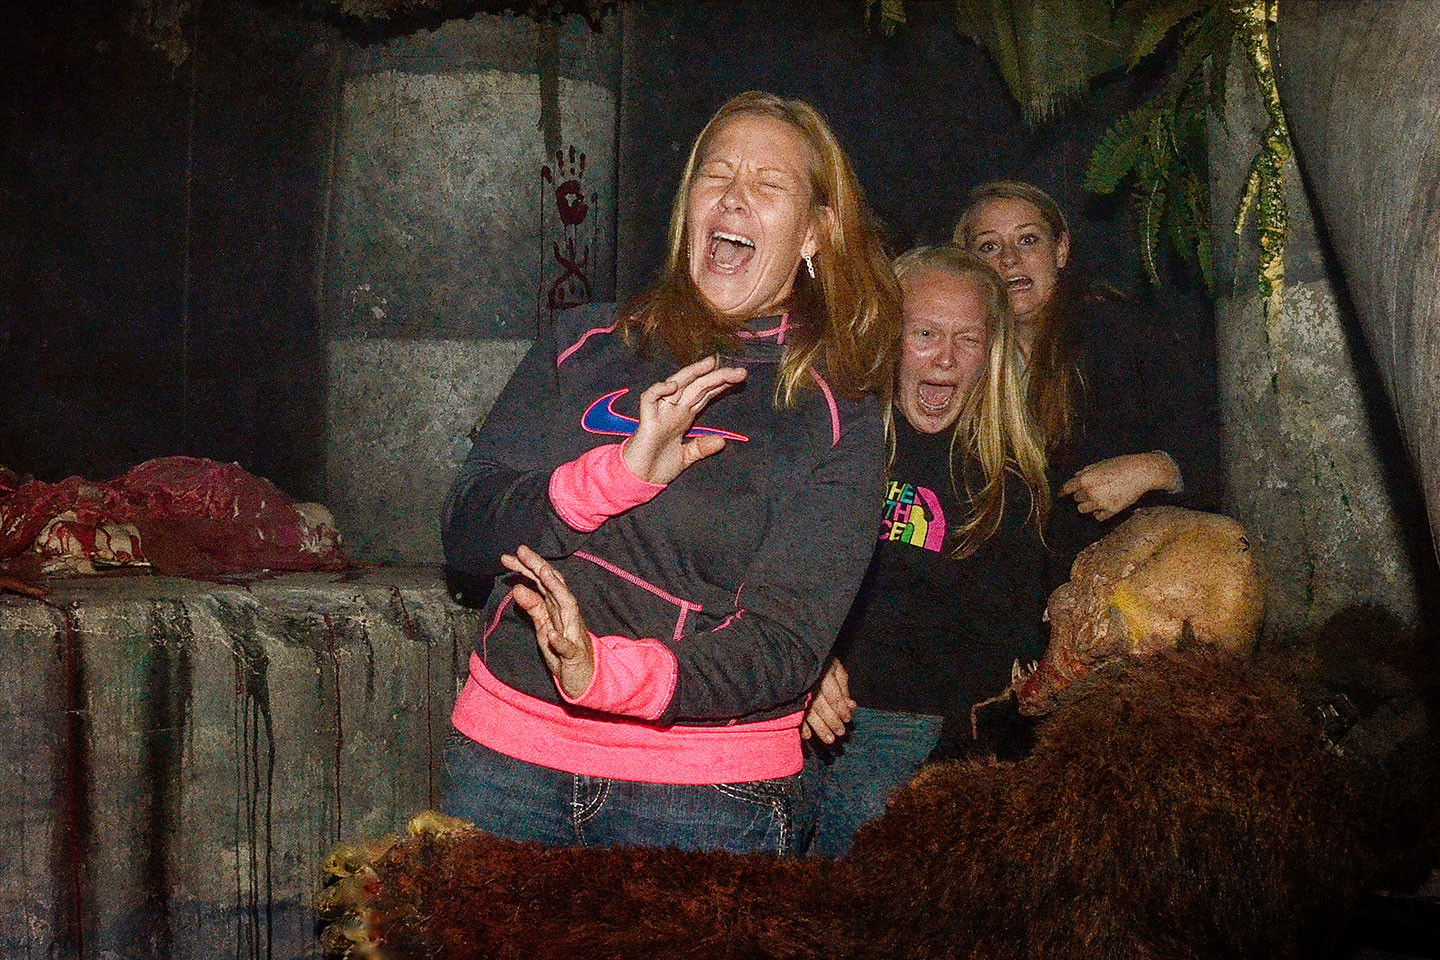 Scariest Haunted House Photos And Videos Erebus Haunted Attraction